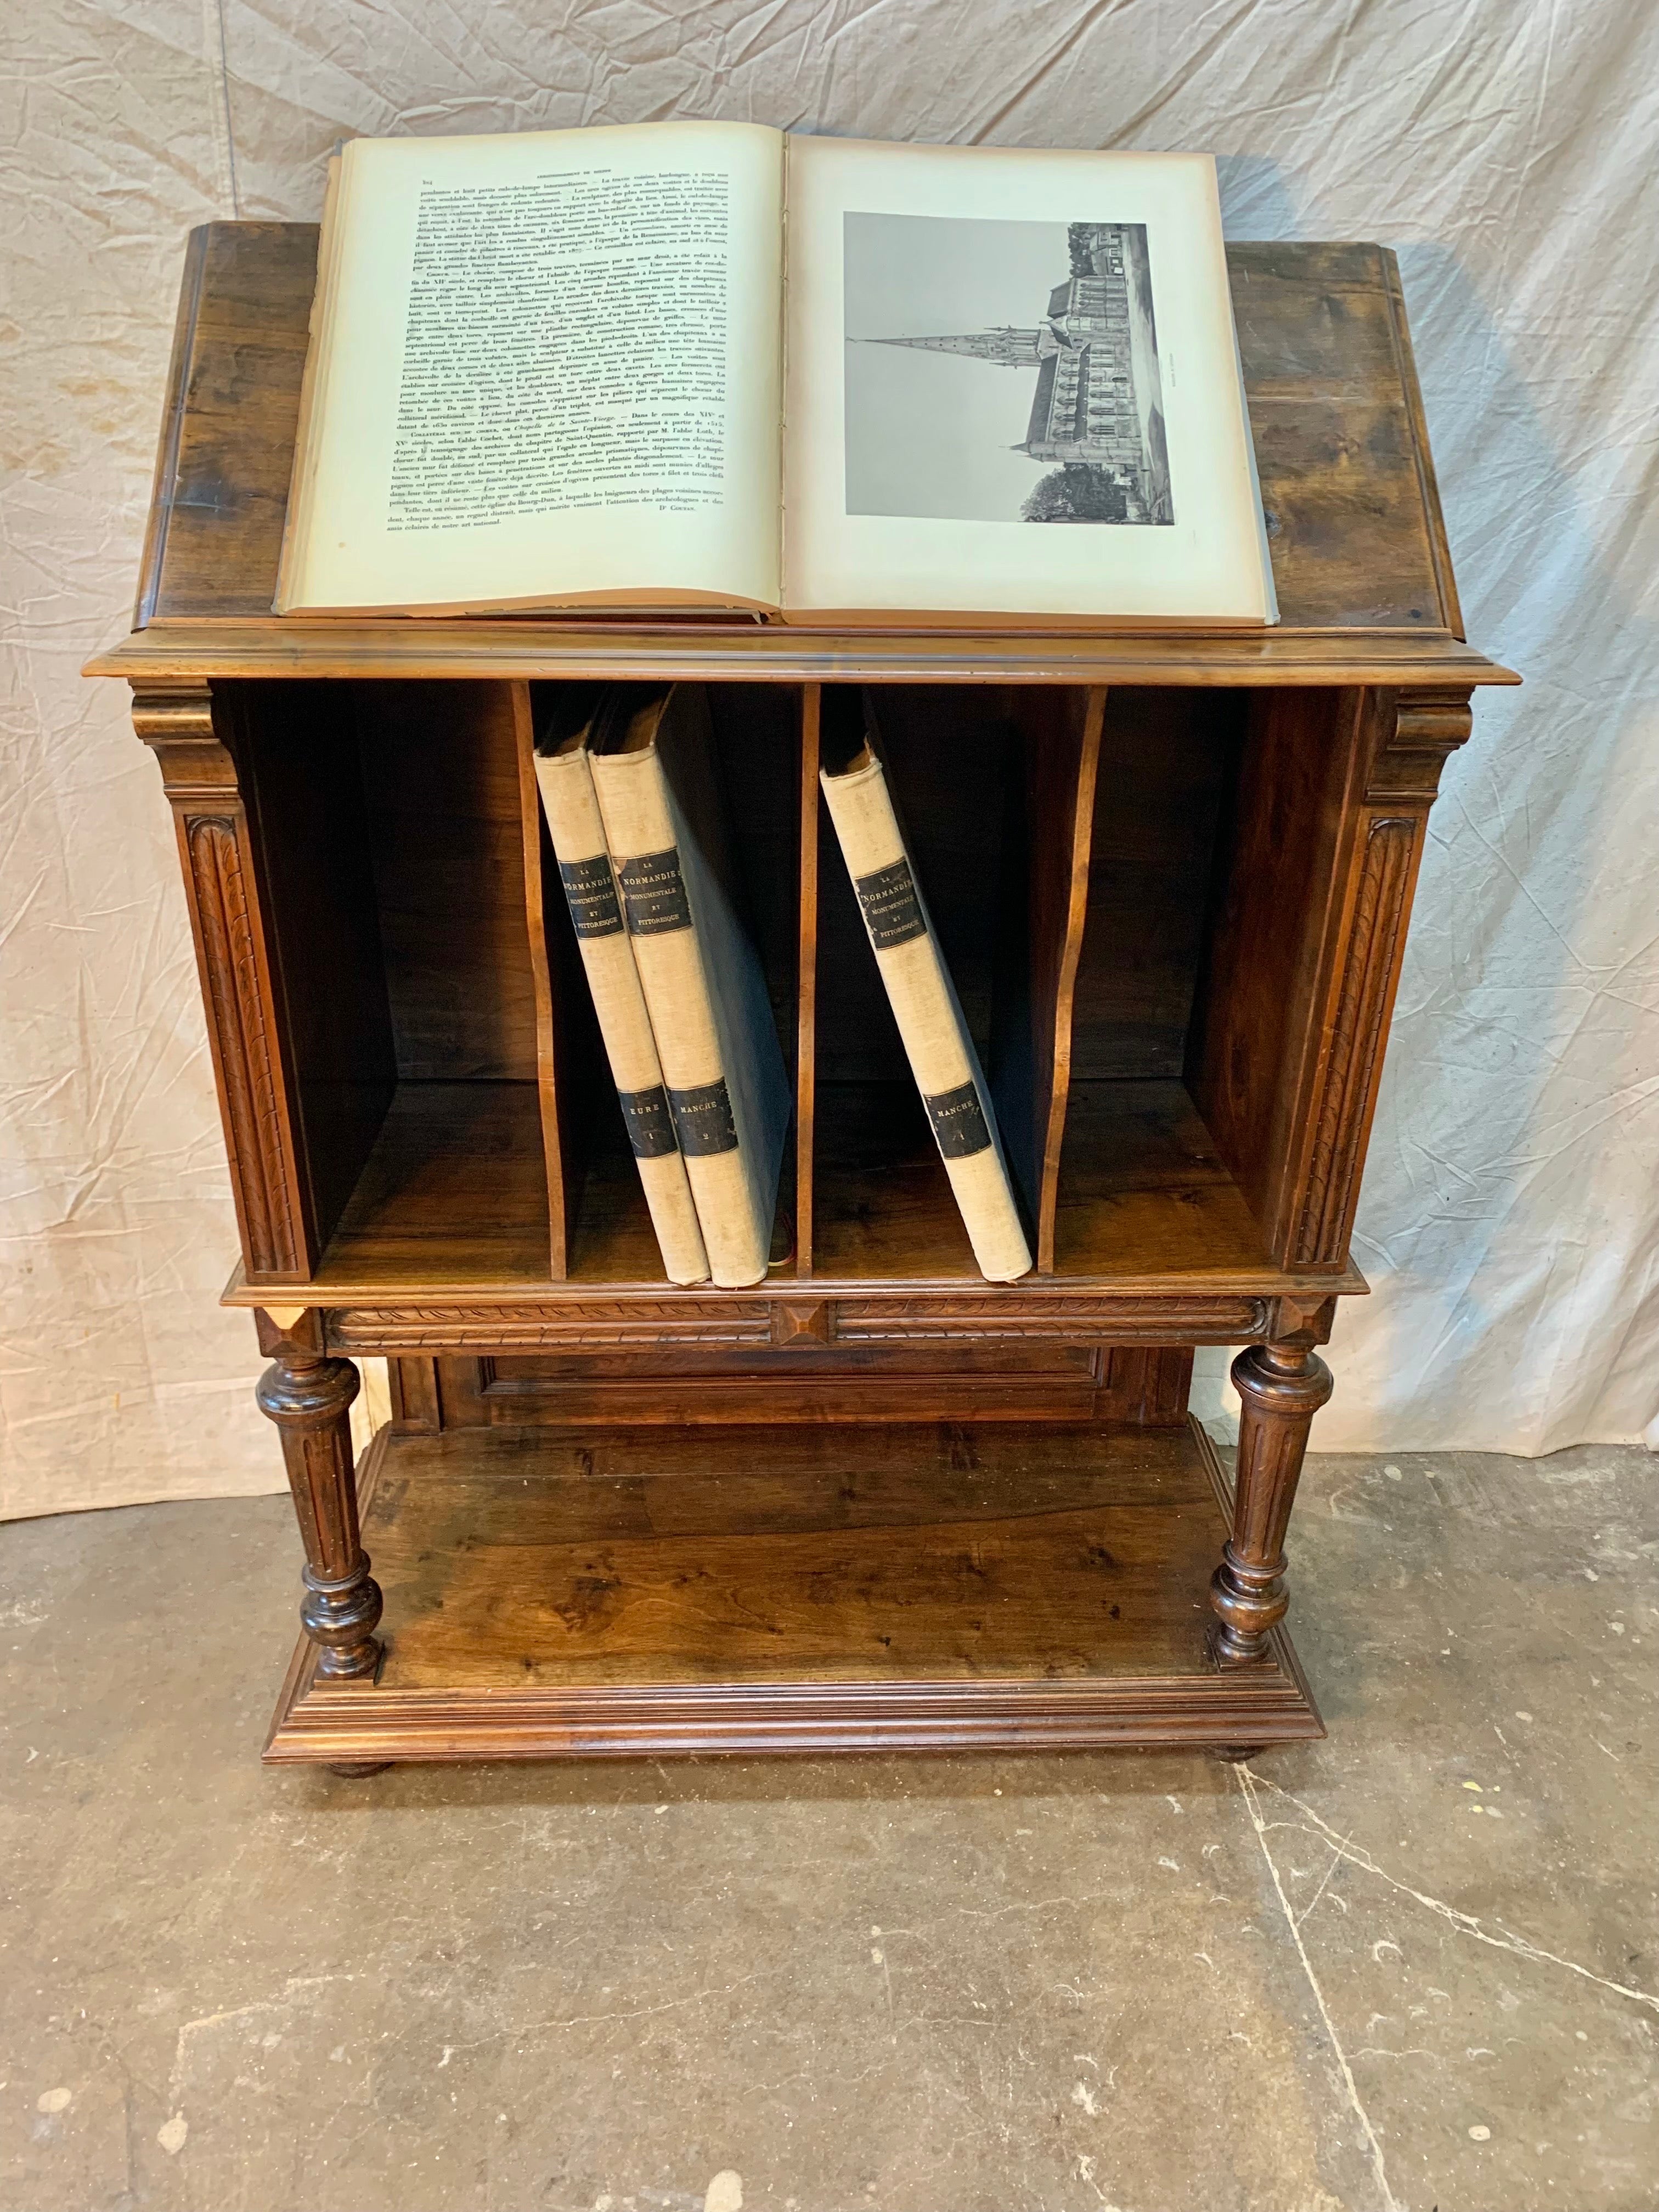 Found in the South of France, this 19th Century French Book Stand was once used in the library of a French Chateau.  Uniquely crafted from old growth walnut, the piece features a lectern top that can be adjusted to different angle heights, which